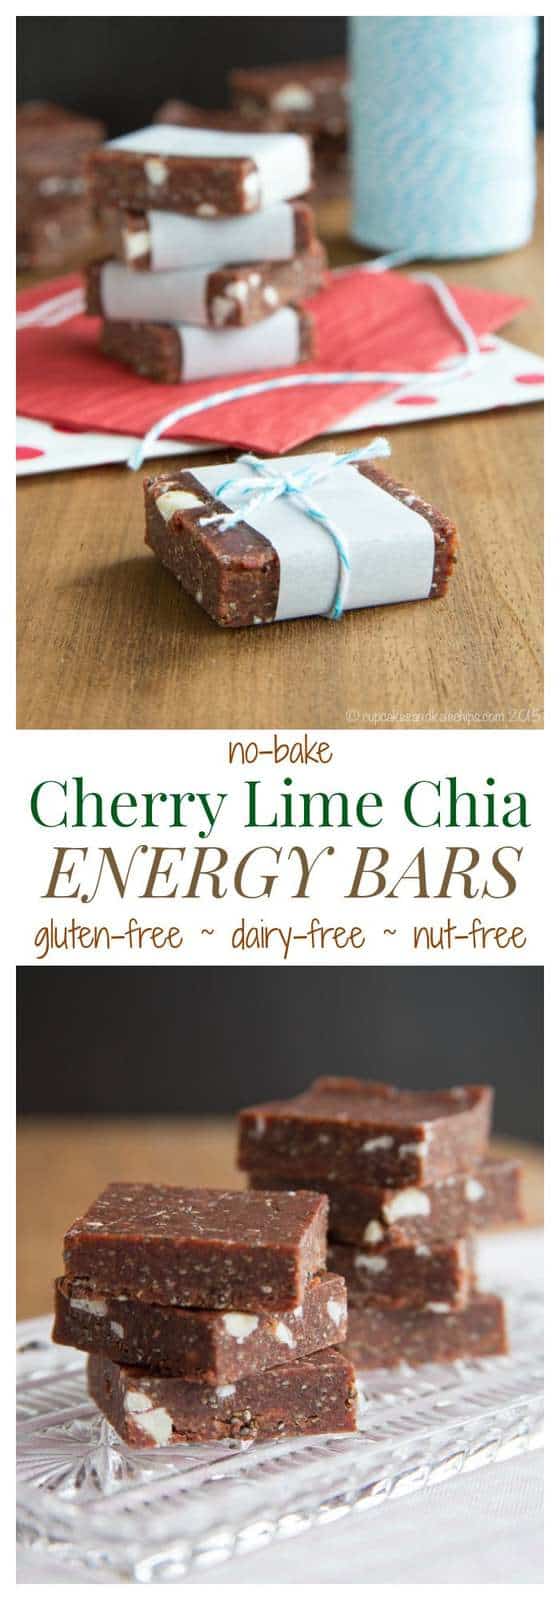 No-Bake Cherry Lime Chia Energy Bars - a super easy and healthy snack, perfect for busy days! Plus they are gluten free, grain free, nut free, vegan and dairy free! | cupcakesandkalechips.com